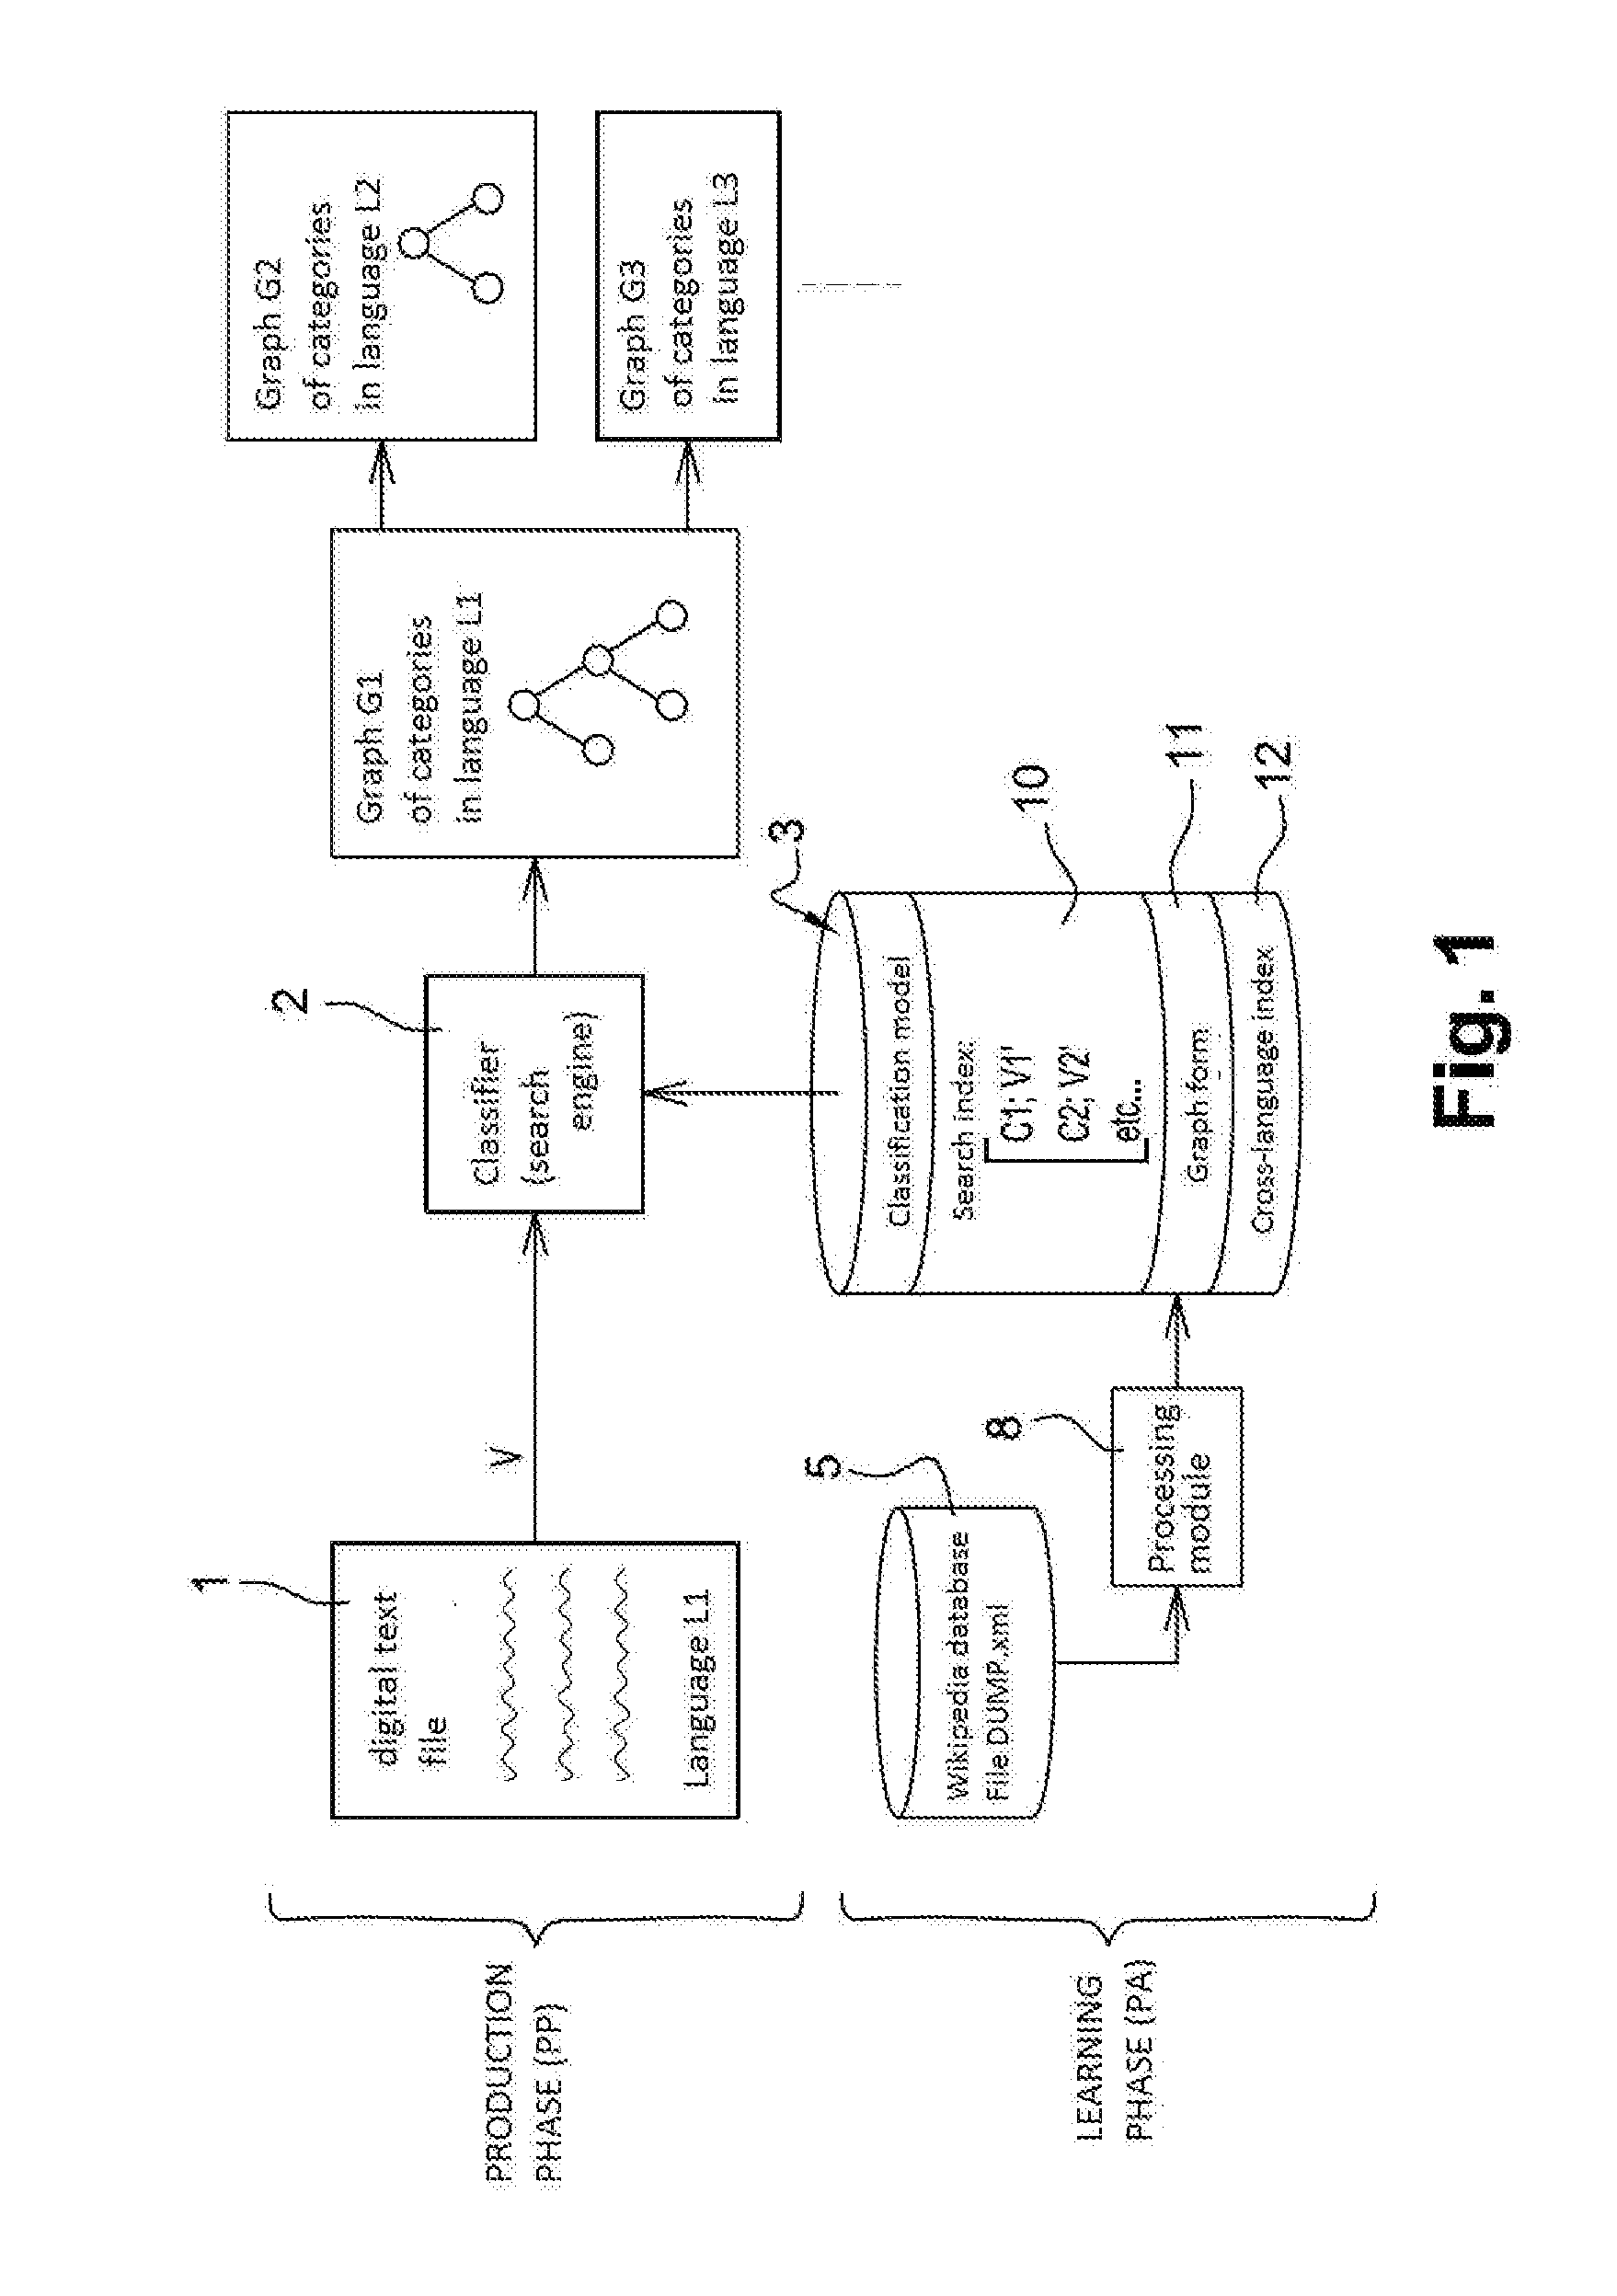 Method for automatic thematic classification of a digital text file